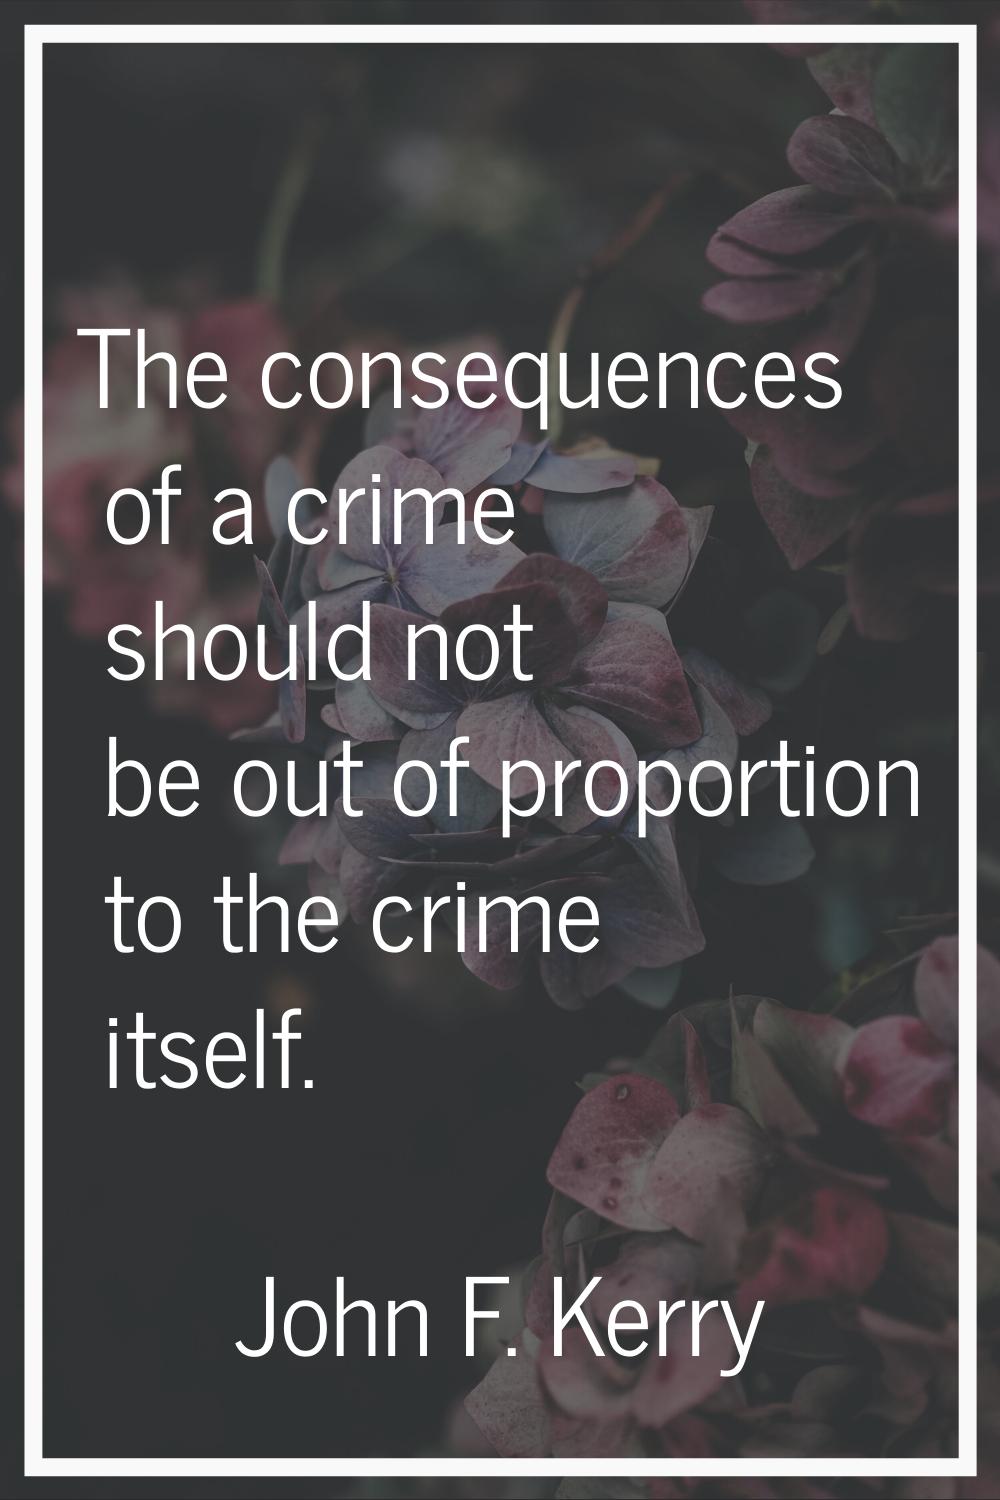 The consequences of a crime should not be out of proportion to the crime itself.